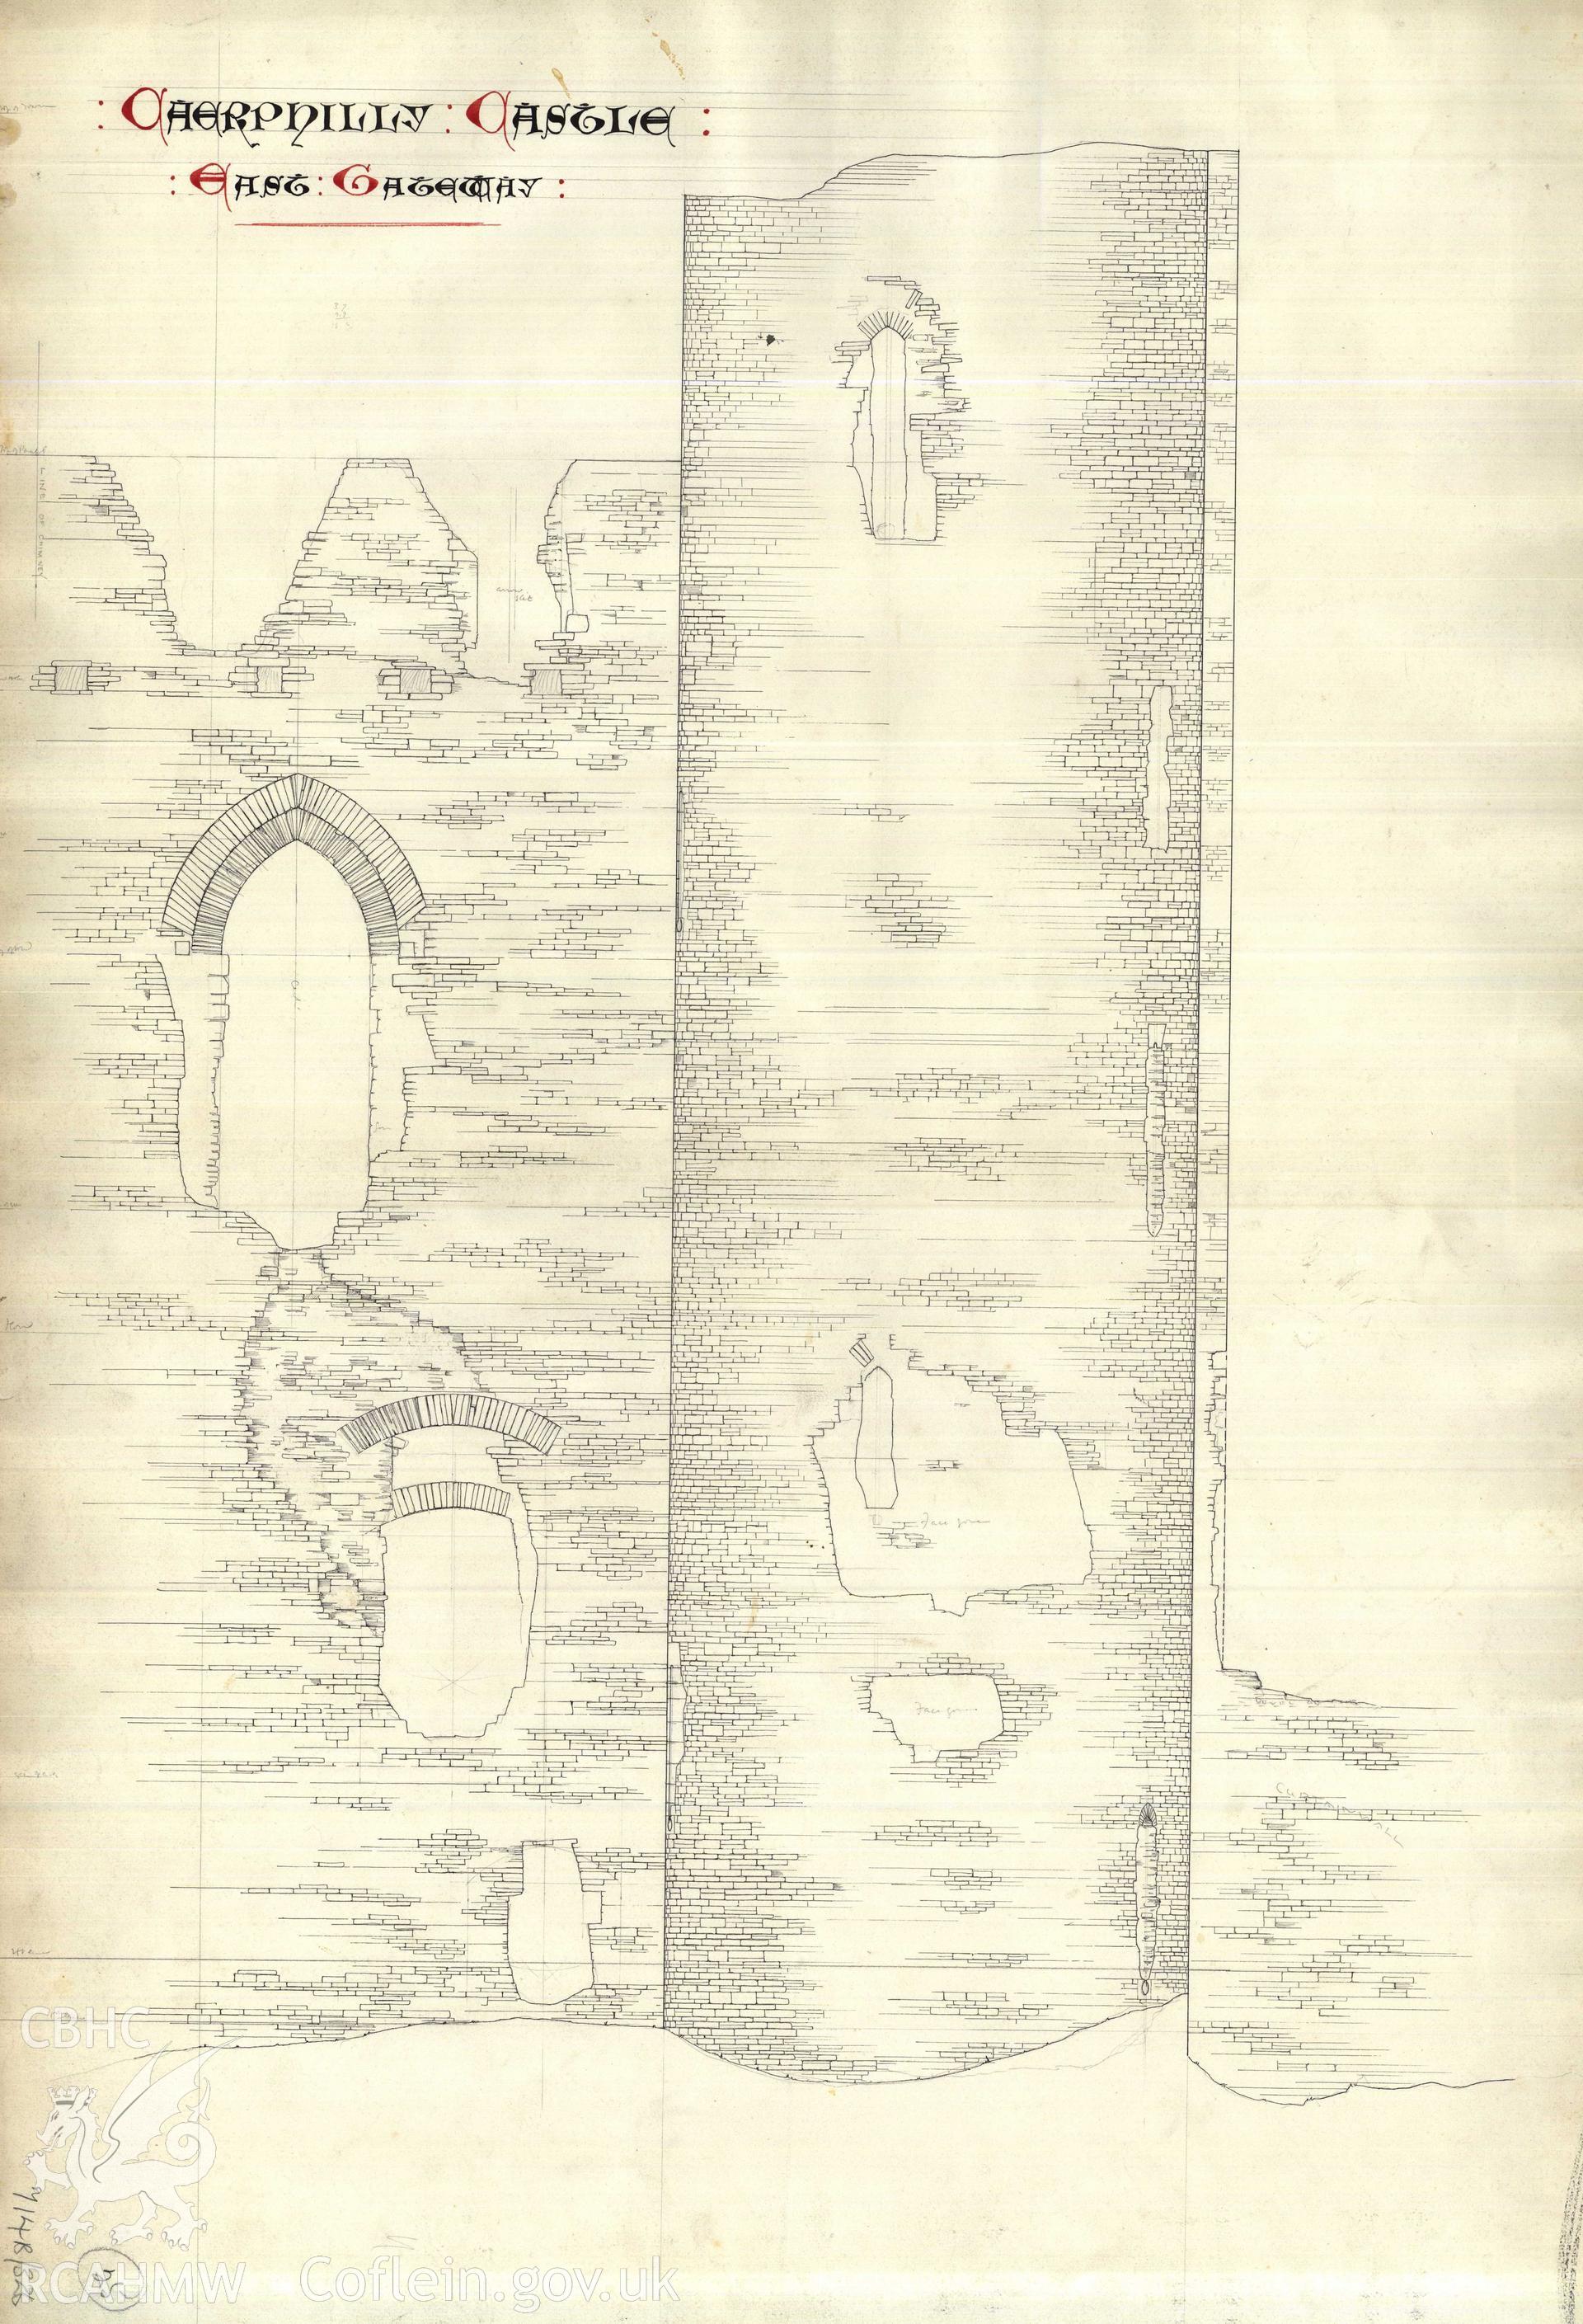 Cadw guardianship monument drawing of Caerphilly Castle. Inner E gate,W (int) elev S half. Cadw Ref. No:714B/326. Scale 1:24.